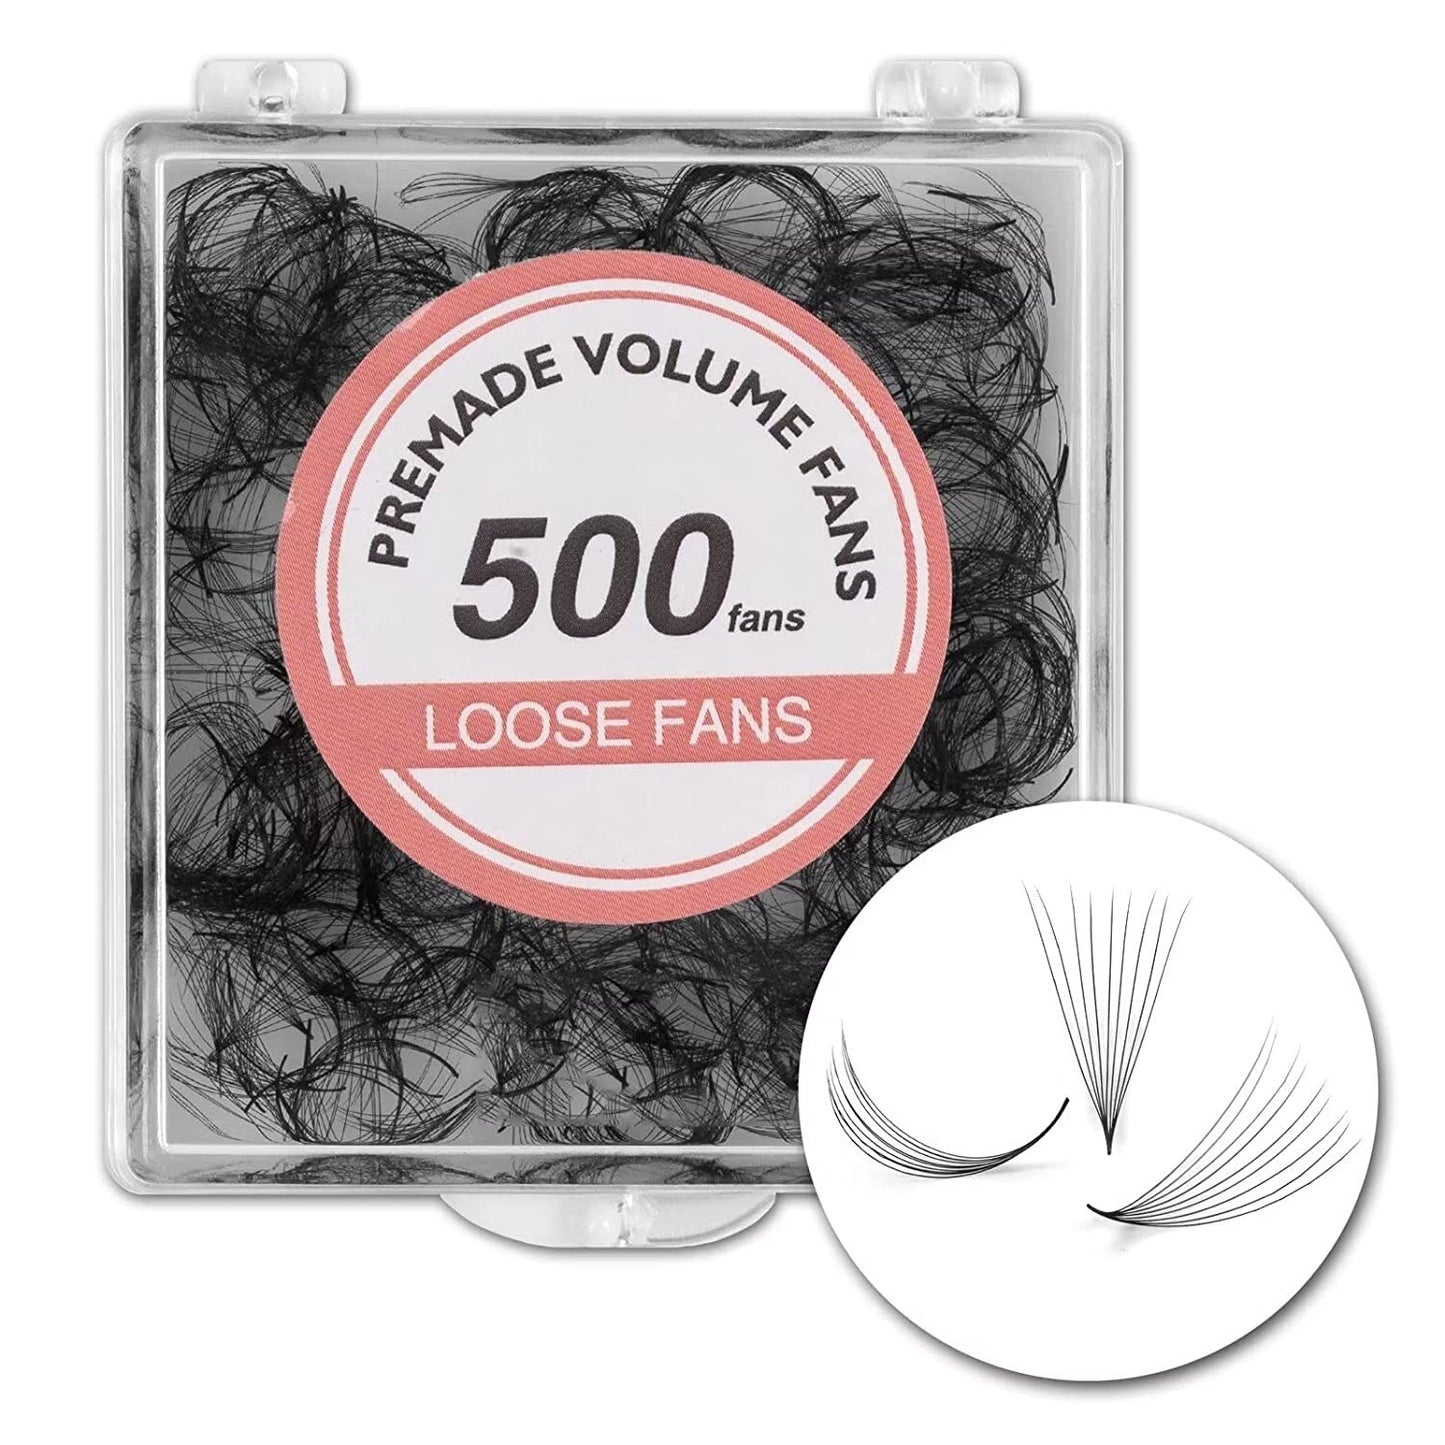 Professional Premade Volume Loose Fans